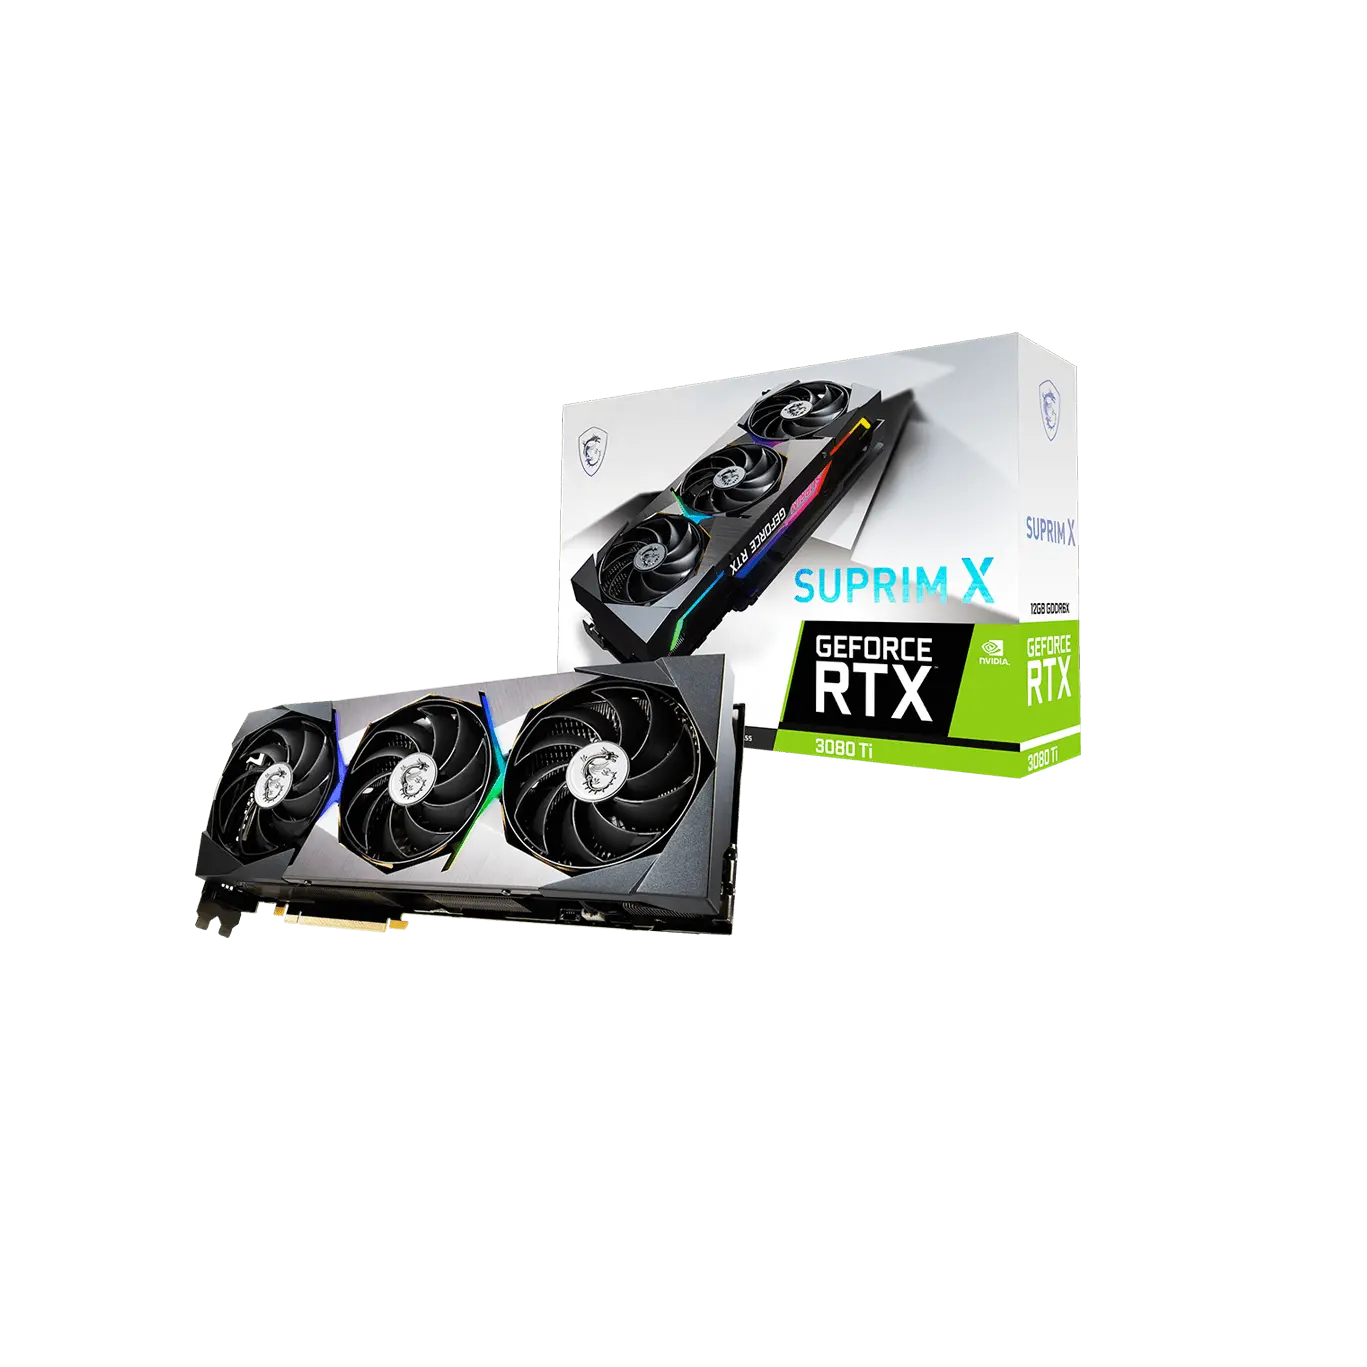 Hot sell Brand New MSI RTX 3080Ti Suprim X 12G Sealed Package For Gaming Desktop RTX 3080 Ti 12G GPU